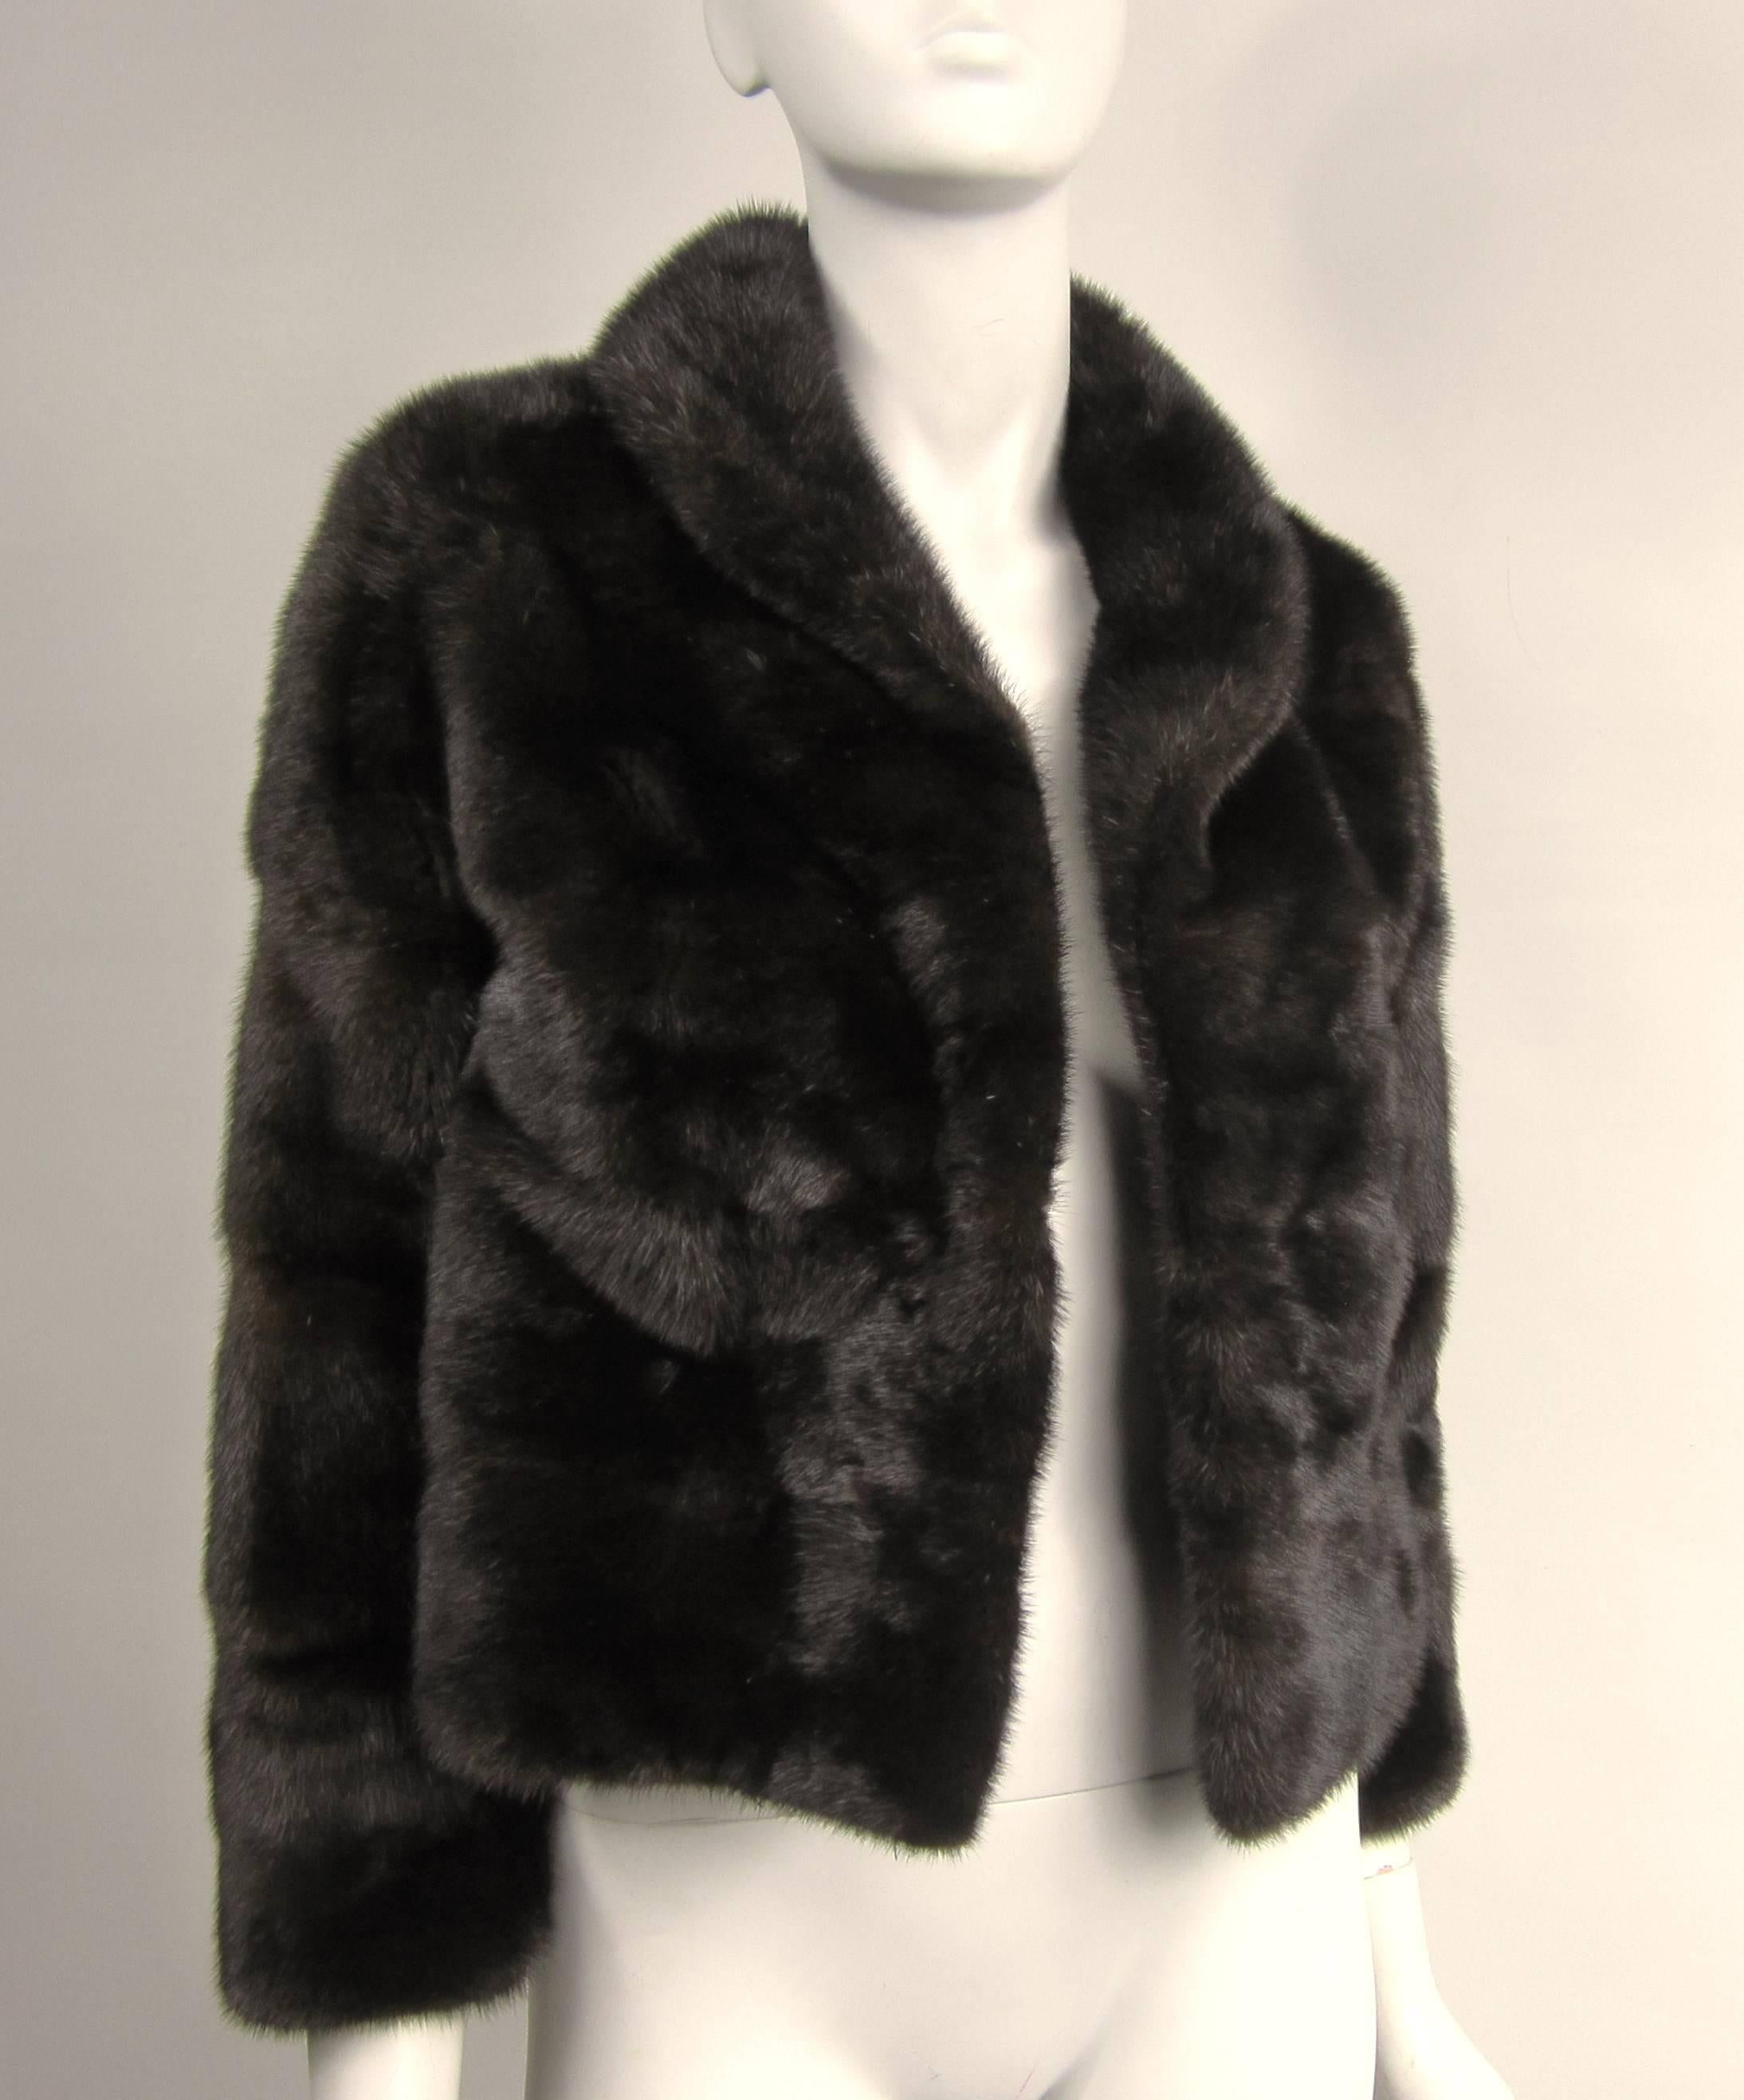 Lux pelts wrap around this petite Ranch Jacket By M Blaustein.Soft and supple minks, no issues. The Jacket has no pockets or closures, would look amazing with jeans as well as that little dress. From a furrier based in Short Hills NJ M Blaustein.